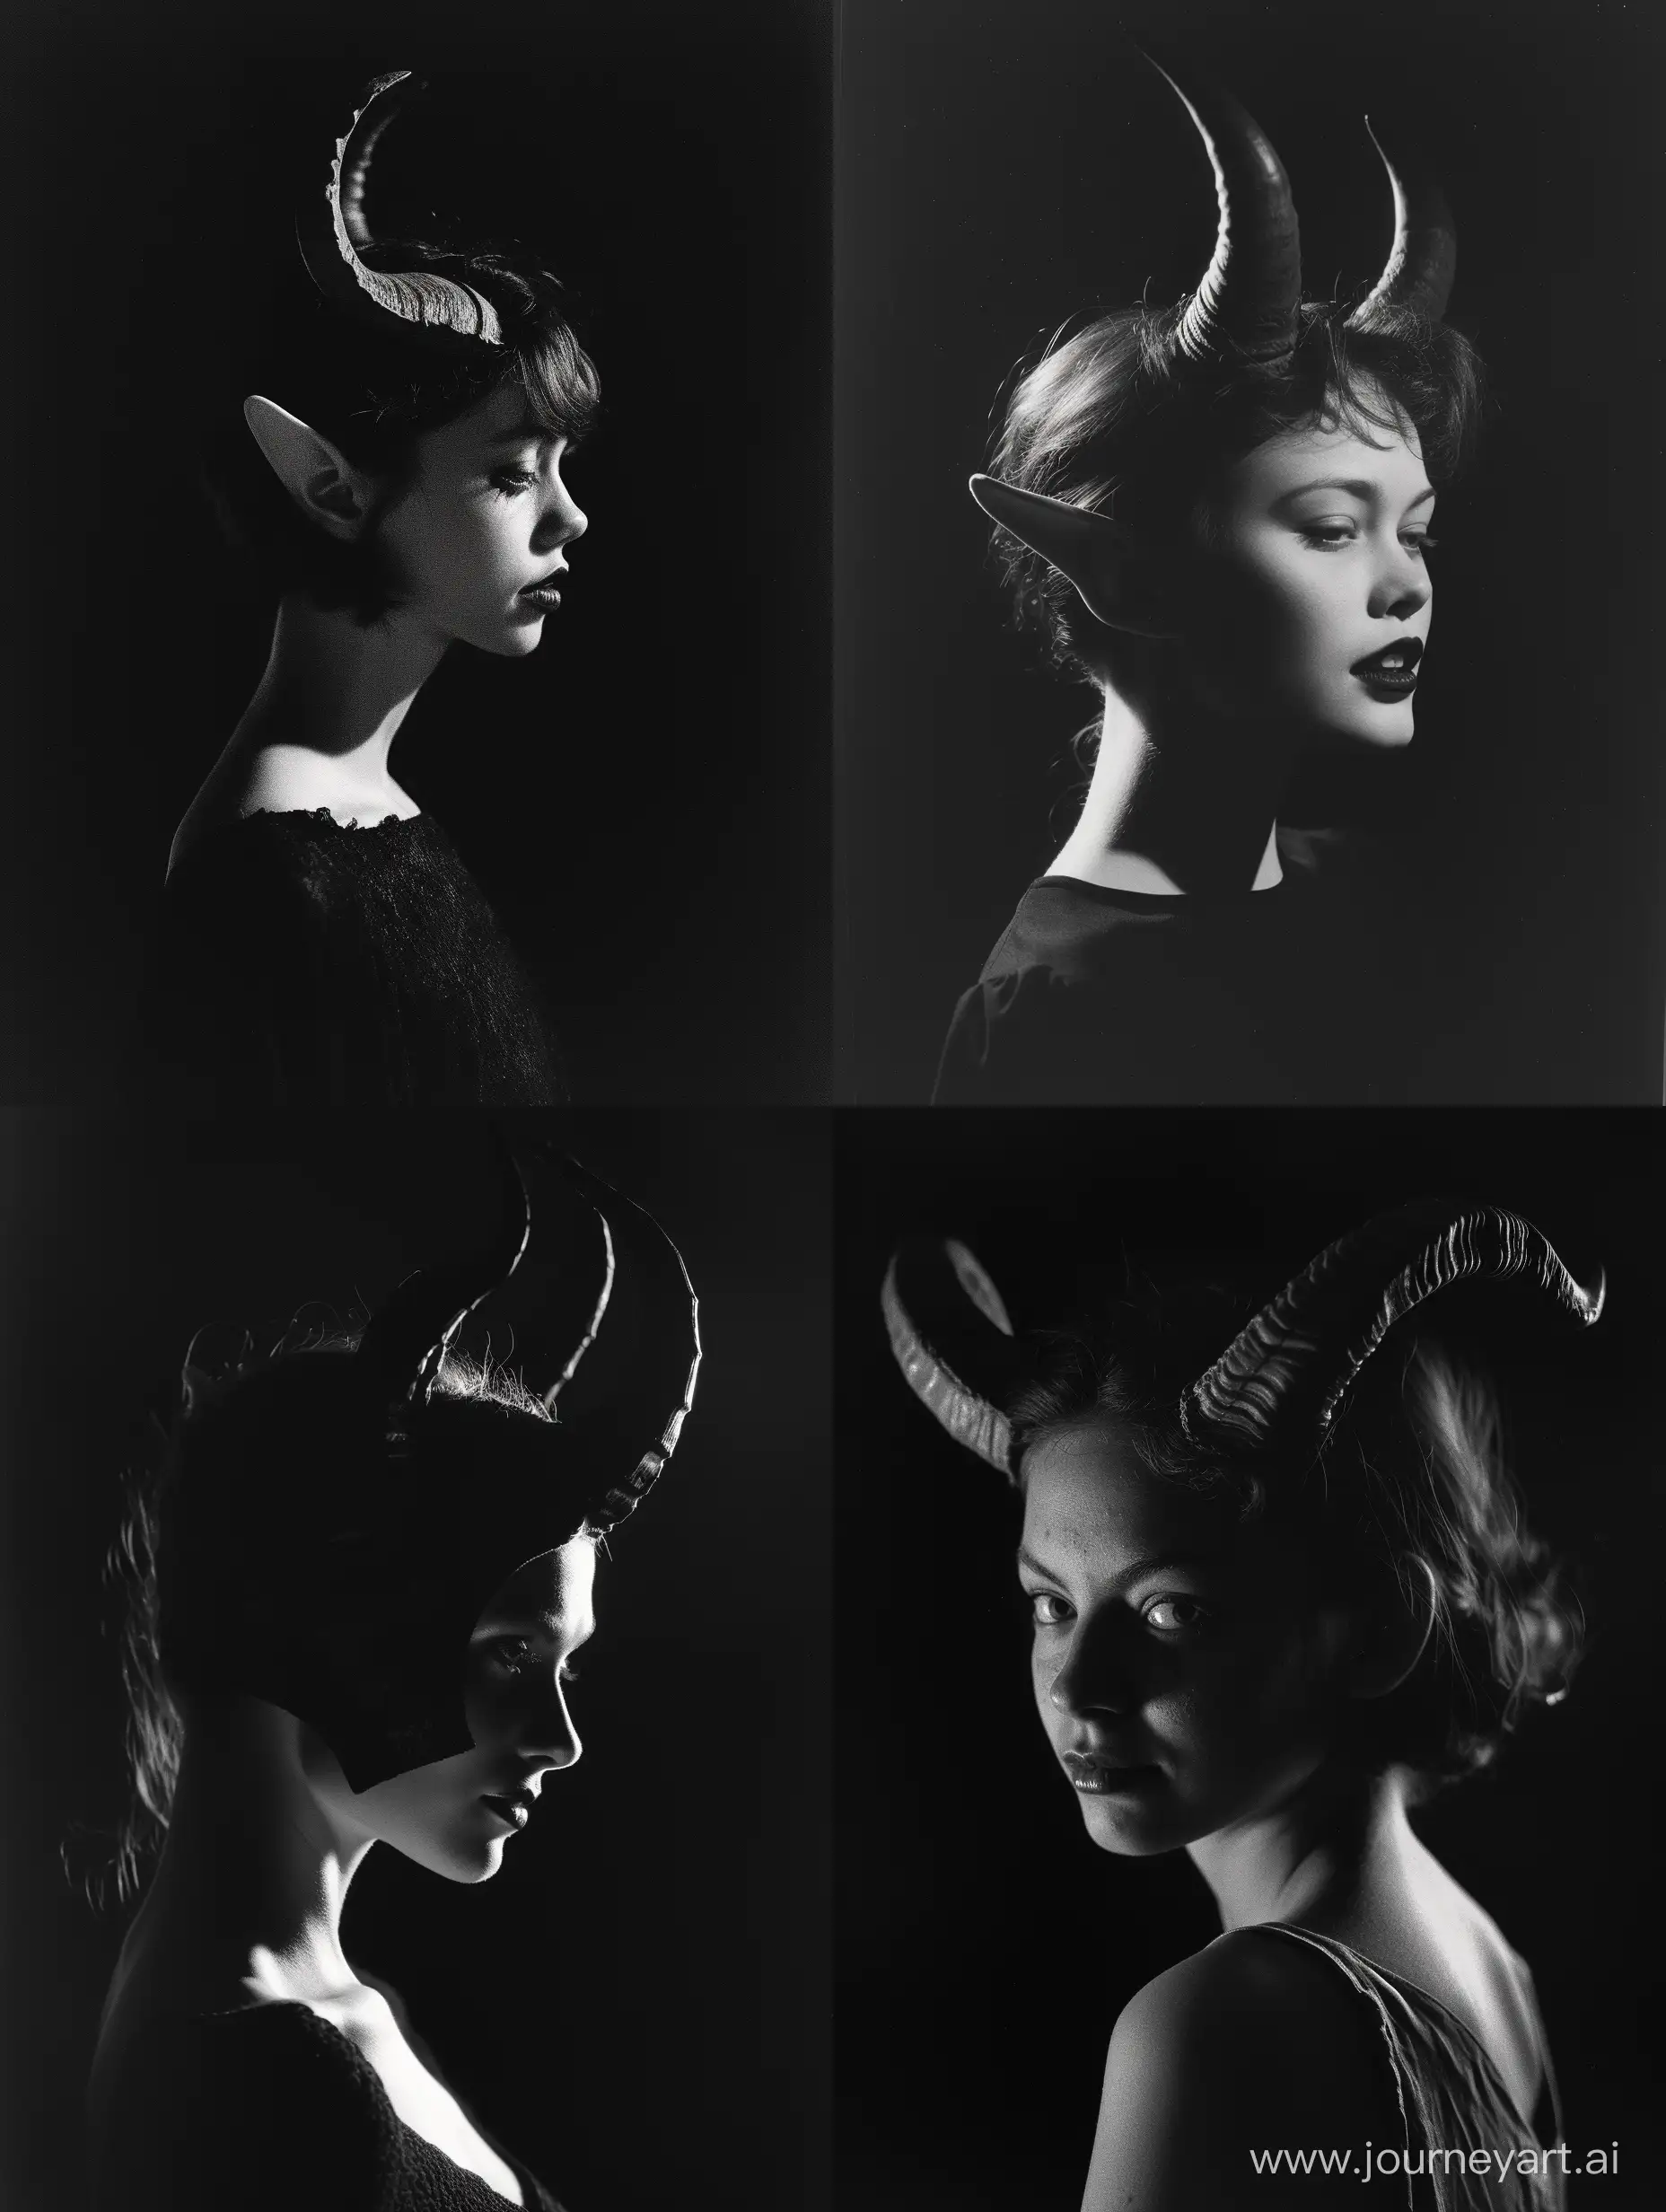 Ethereal-Lady-Demon-Grayscale-Portrait-with-Horns-on-Black-Background